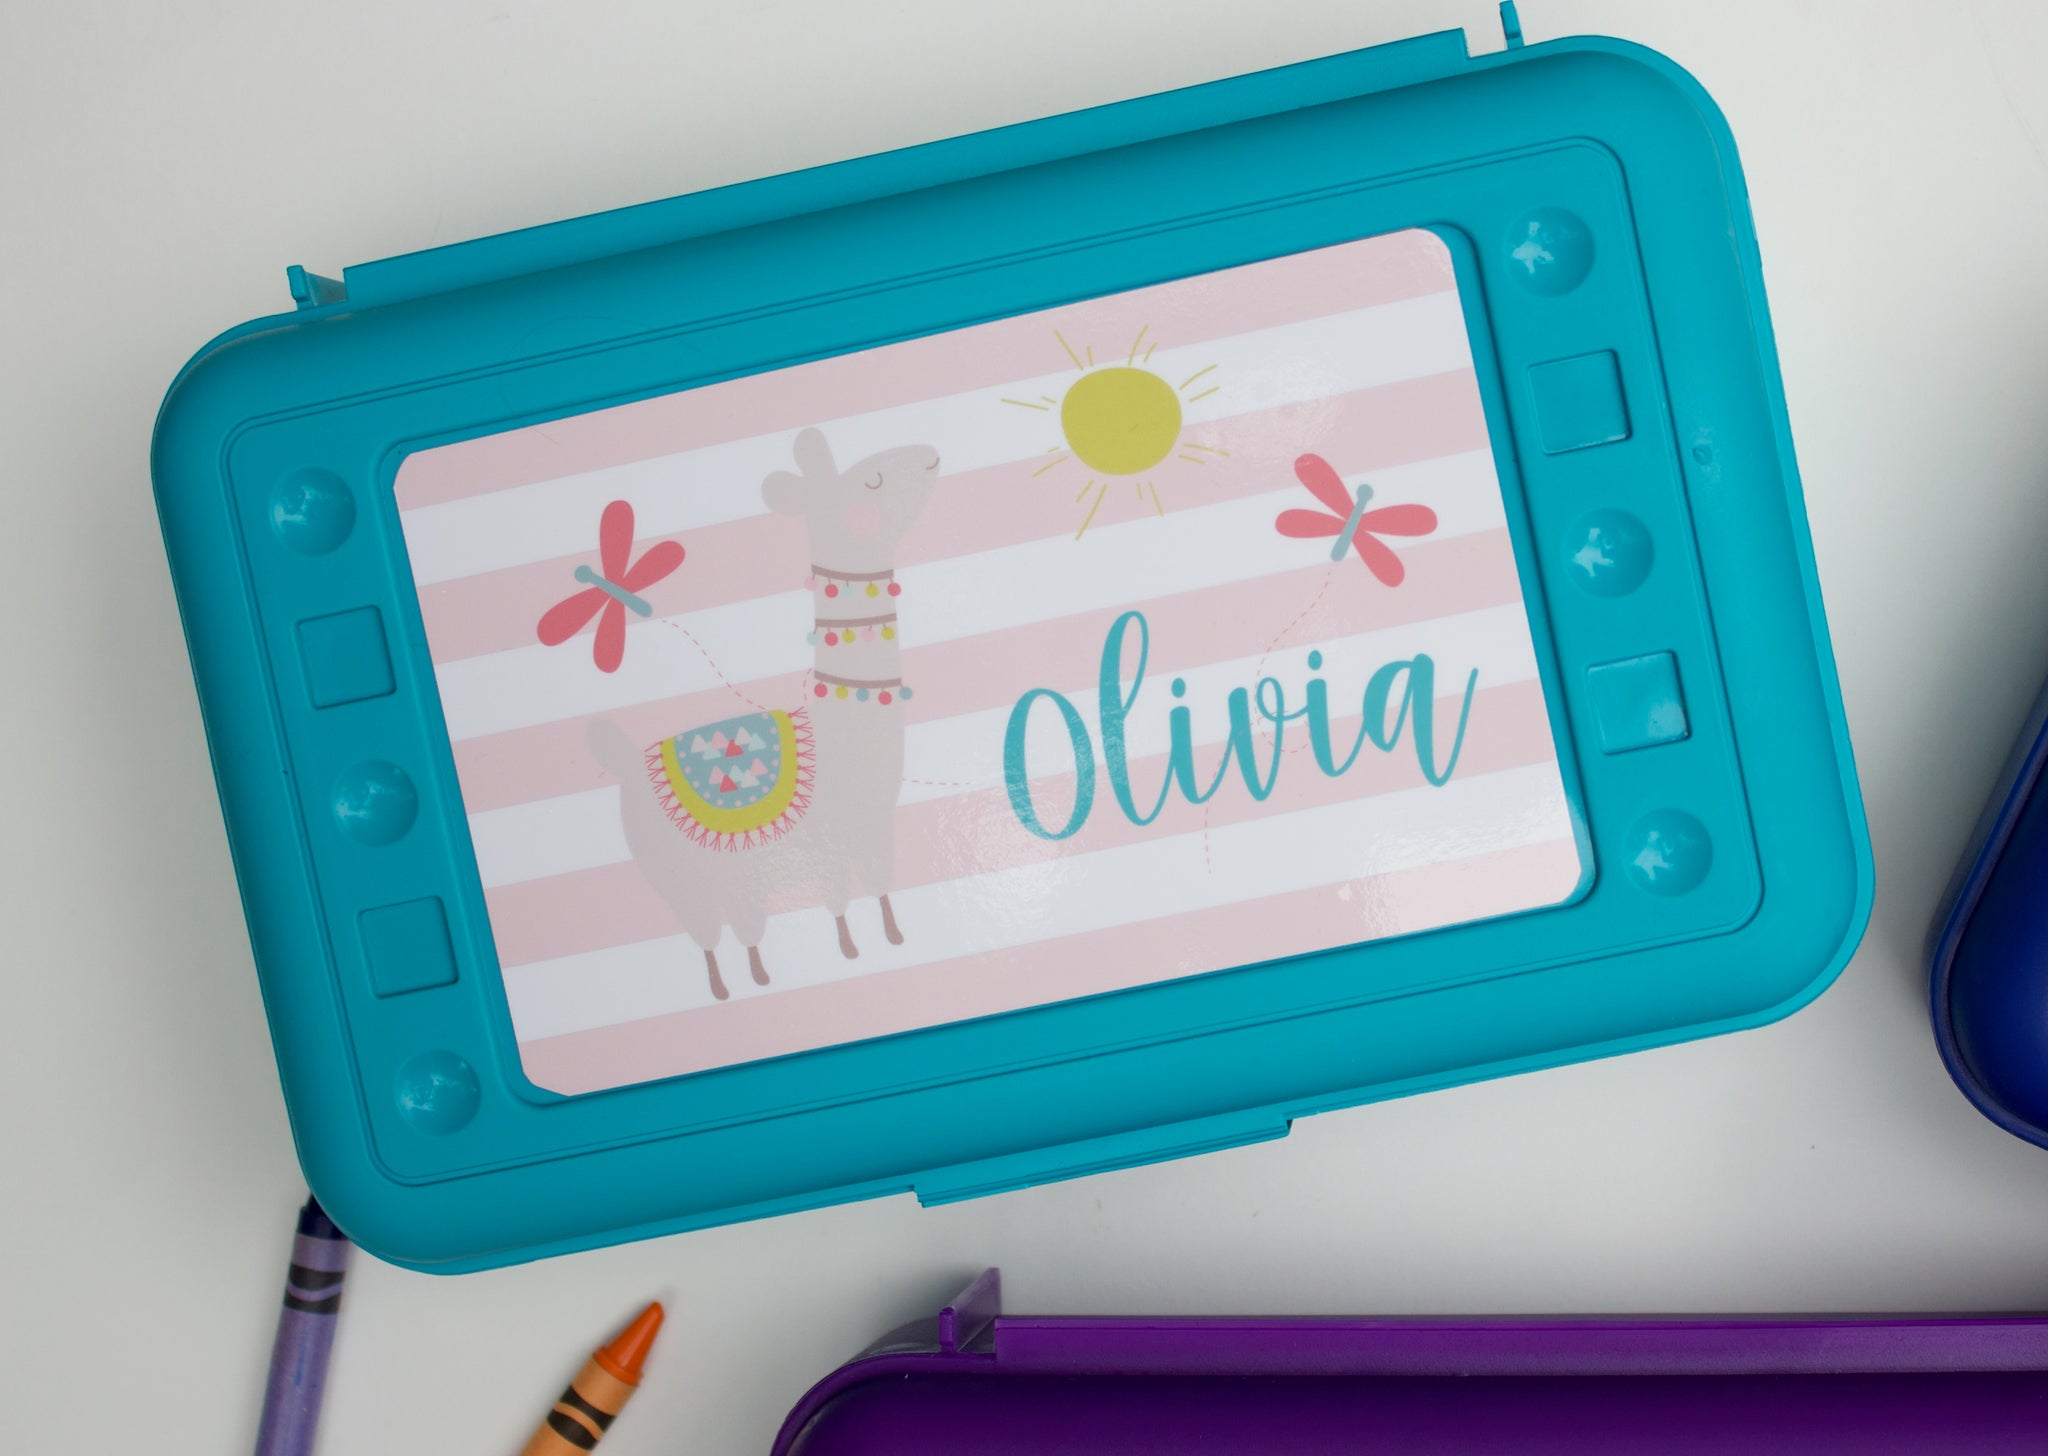 Personalized School Pencil Box - All options - Happy Thoughts Gifts